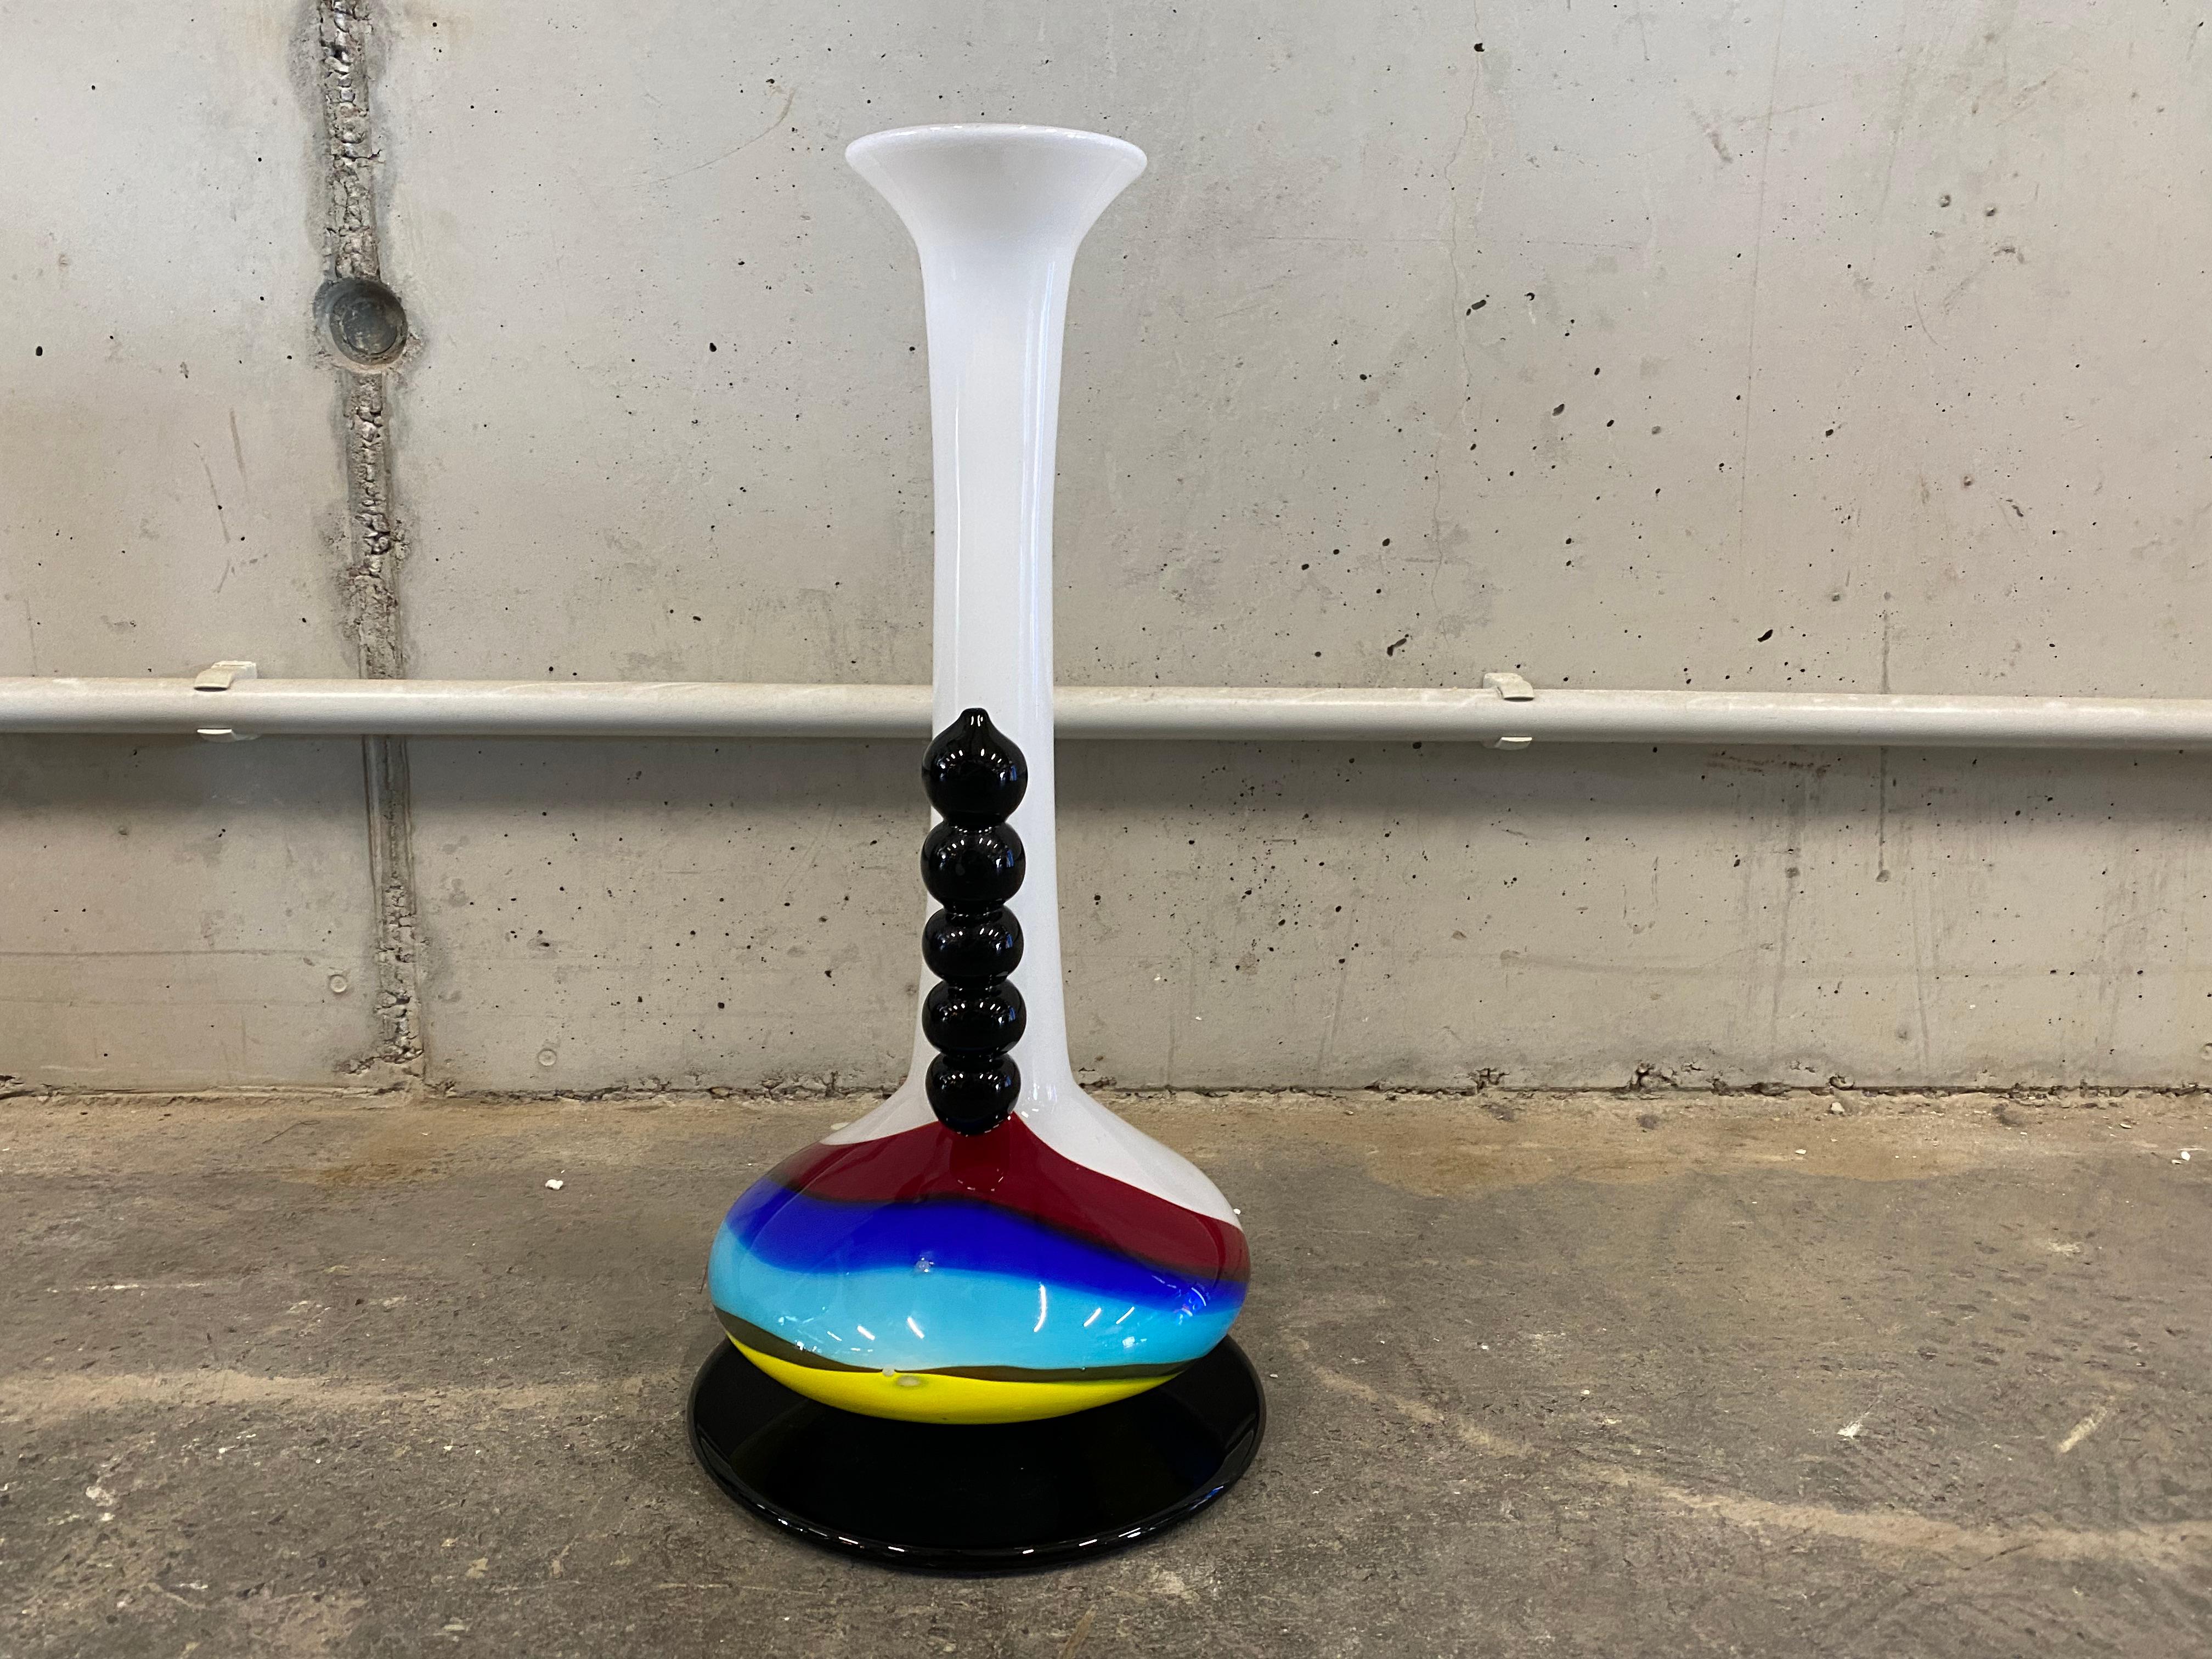 Murano vase by Heinz Oestergaard for Pauly, one of the oldest Venetian glass factories. This glass artwork by German designer and fashion designer Heinz Oestergaard is unmistakably a work from the 1990s and the time of the Memphis Design